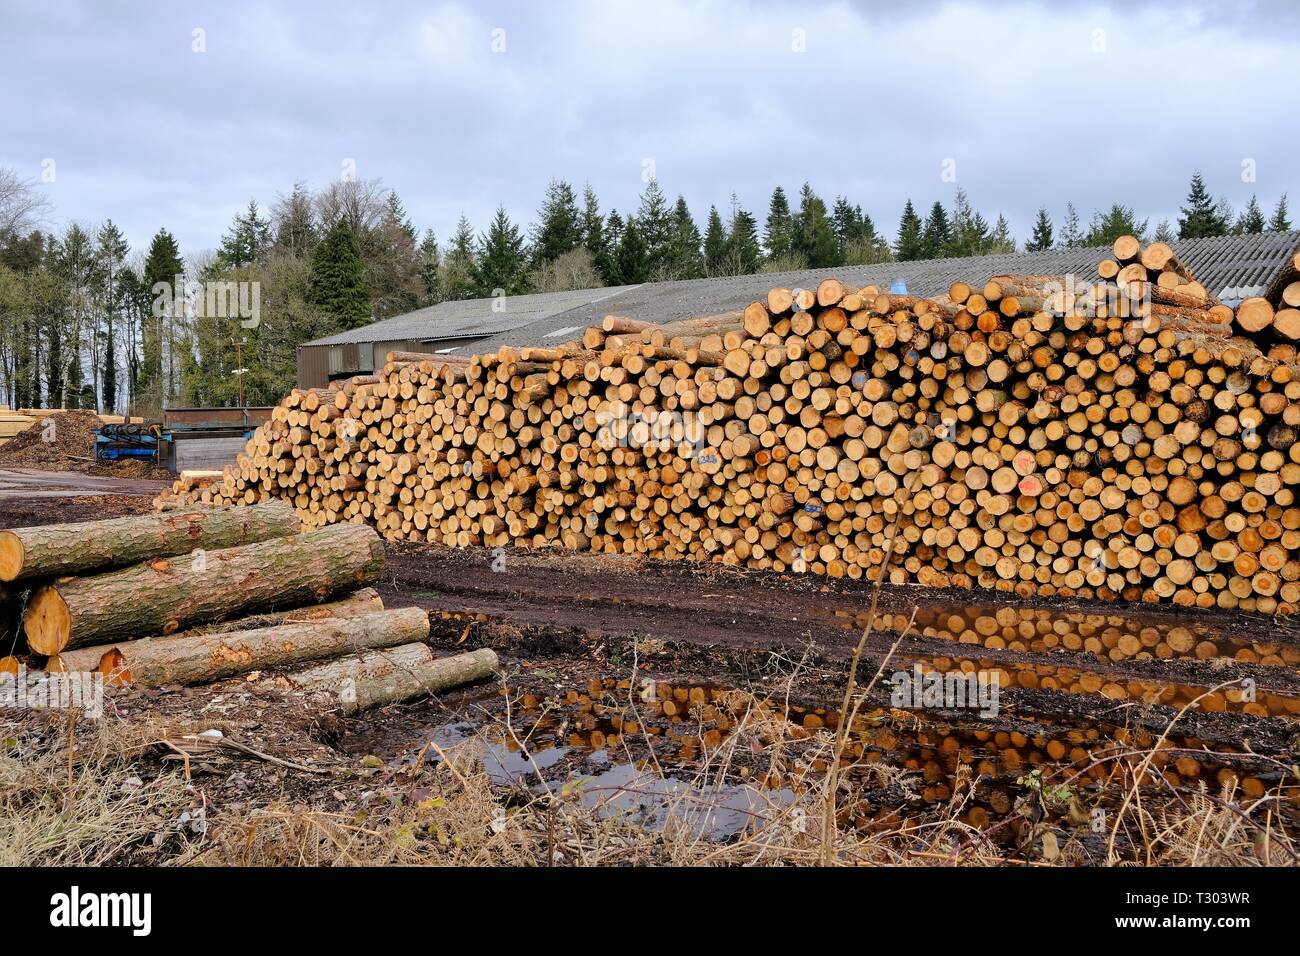 Woodyard, Lumber, Commercial, Forestry, Sustainable, Natural, Cord Wood, Ecology, Sawn Timber, Biofuel, Trees, Logging, Business, Rustic. Stock Photo